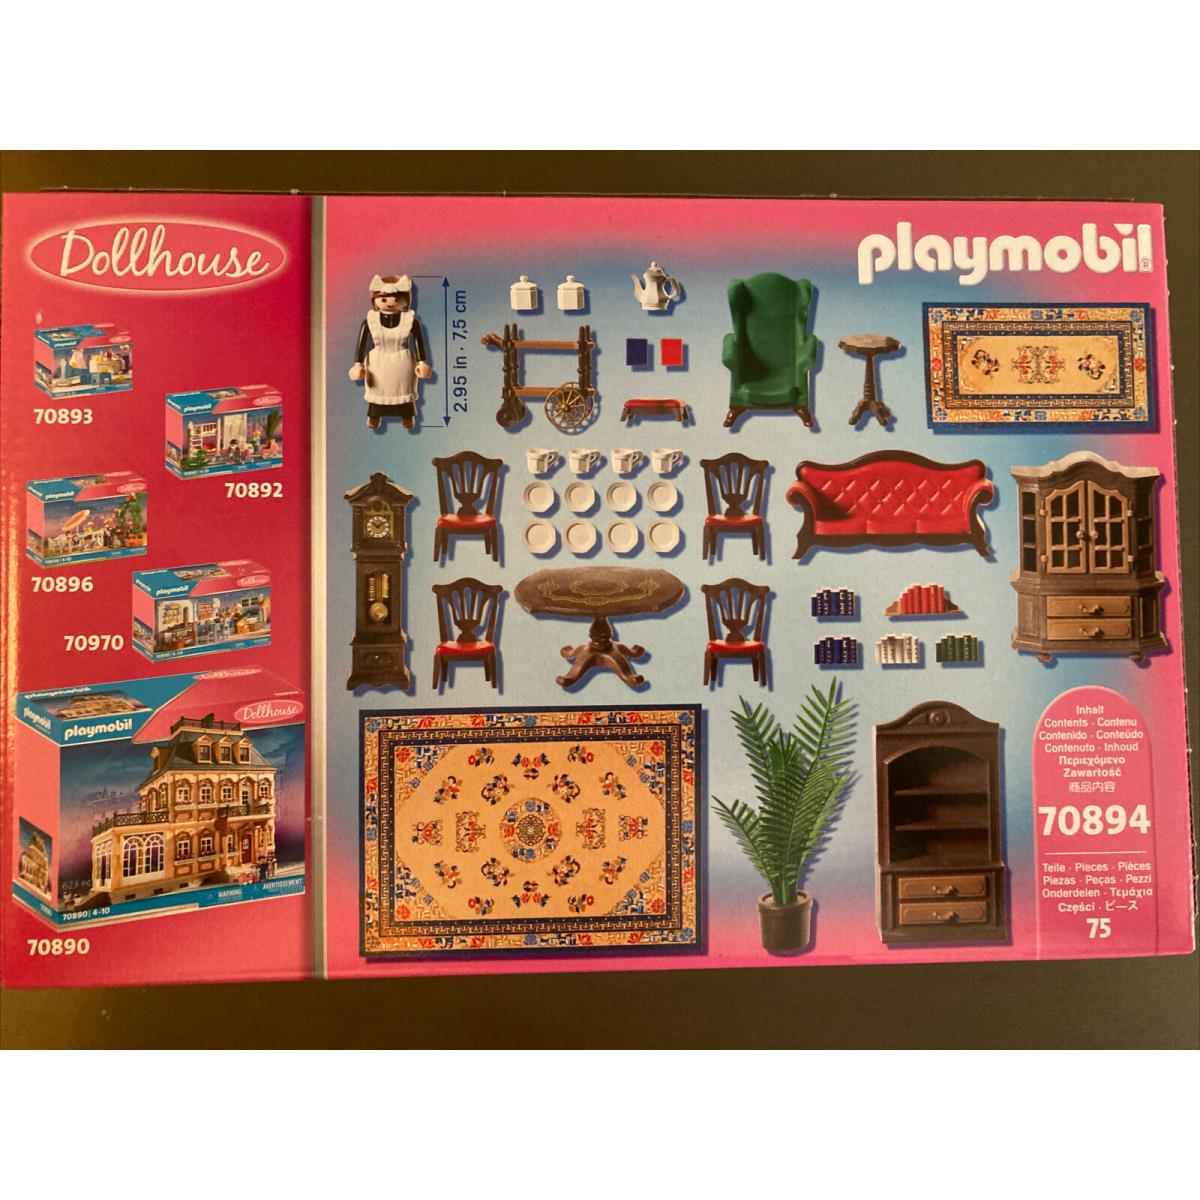 Playmobil Dollhouse Victorian Dining Room Furniture 70894 Mansion 5320